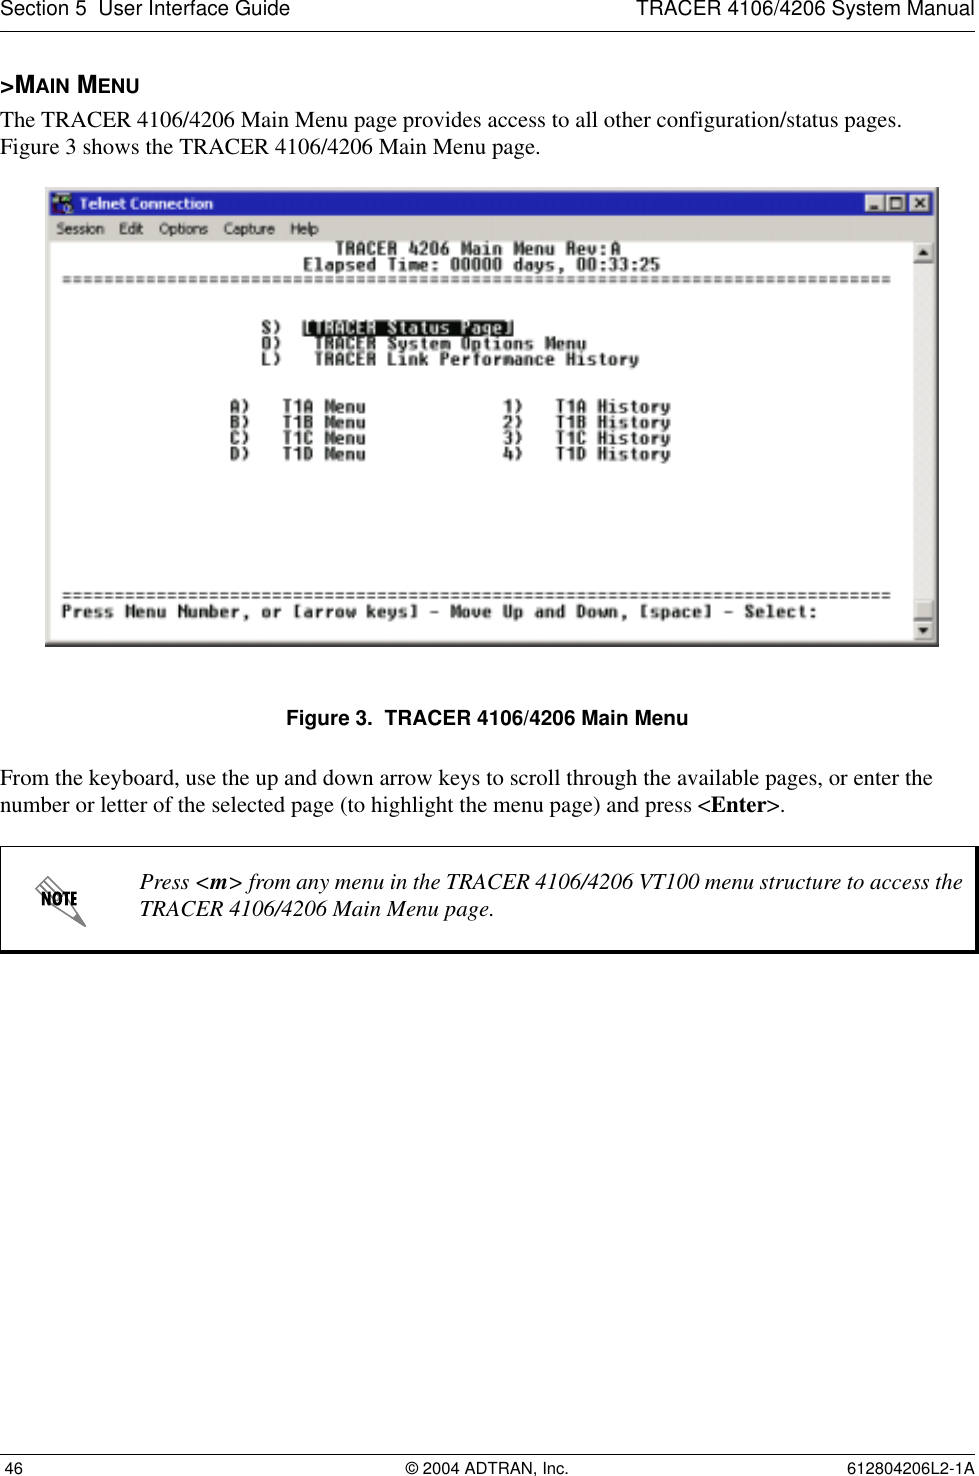 Section 5  User Interface Guide TRACER 4106/4206 System Manual 46 © 2004 ADTRAN, Inc. 612804206L2-1A&gt;MAIN MENUThe TRACER 4106/4206 Main Menu page provides access to all other configuration/status pages. Figure 3 shows the TRACER 4106/4206 Main Menu page.Figure 3.  TRACER 4106/4206 Main MenuFrom the keyboard, use the up and down arrow keys to scroll through the available pages, or enter the number or letter of the selected page (to highlight the menu page) and press &lt;Enter&gt;.Press &lt;m&gt; from any menu in the TRACER 4106/4206 VT100 menu structure to access the TRACER 4106/4206 Main Menu page.